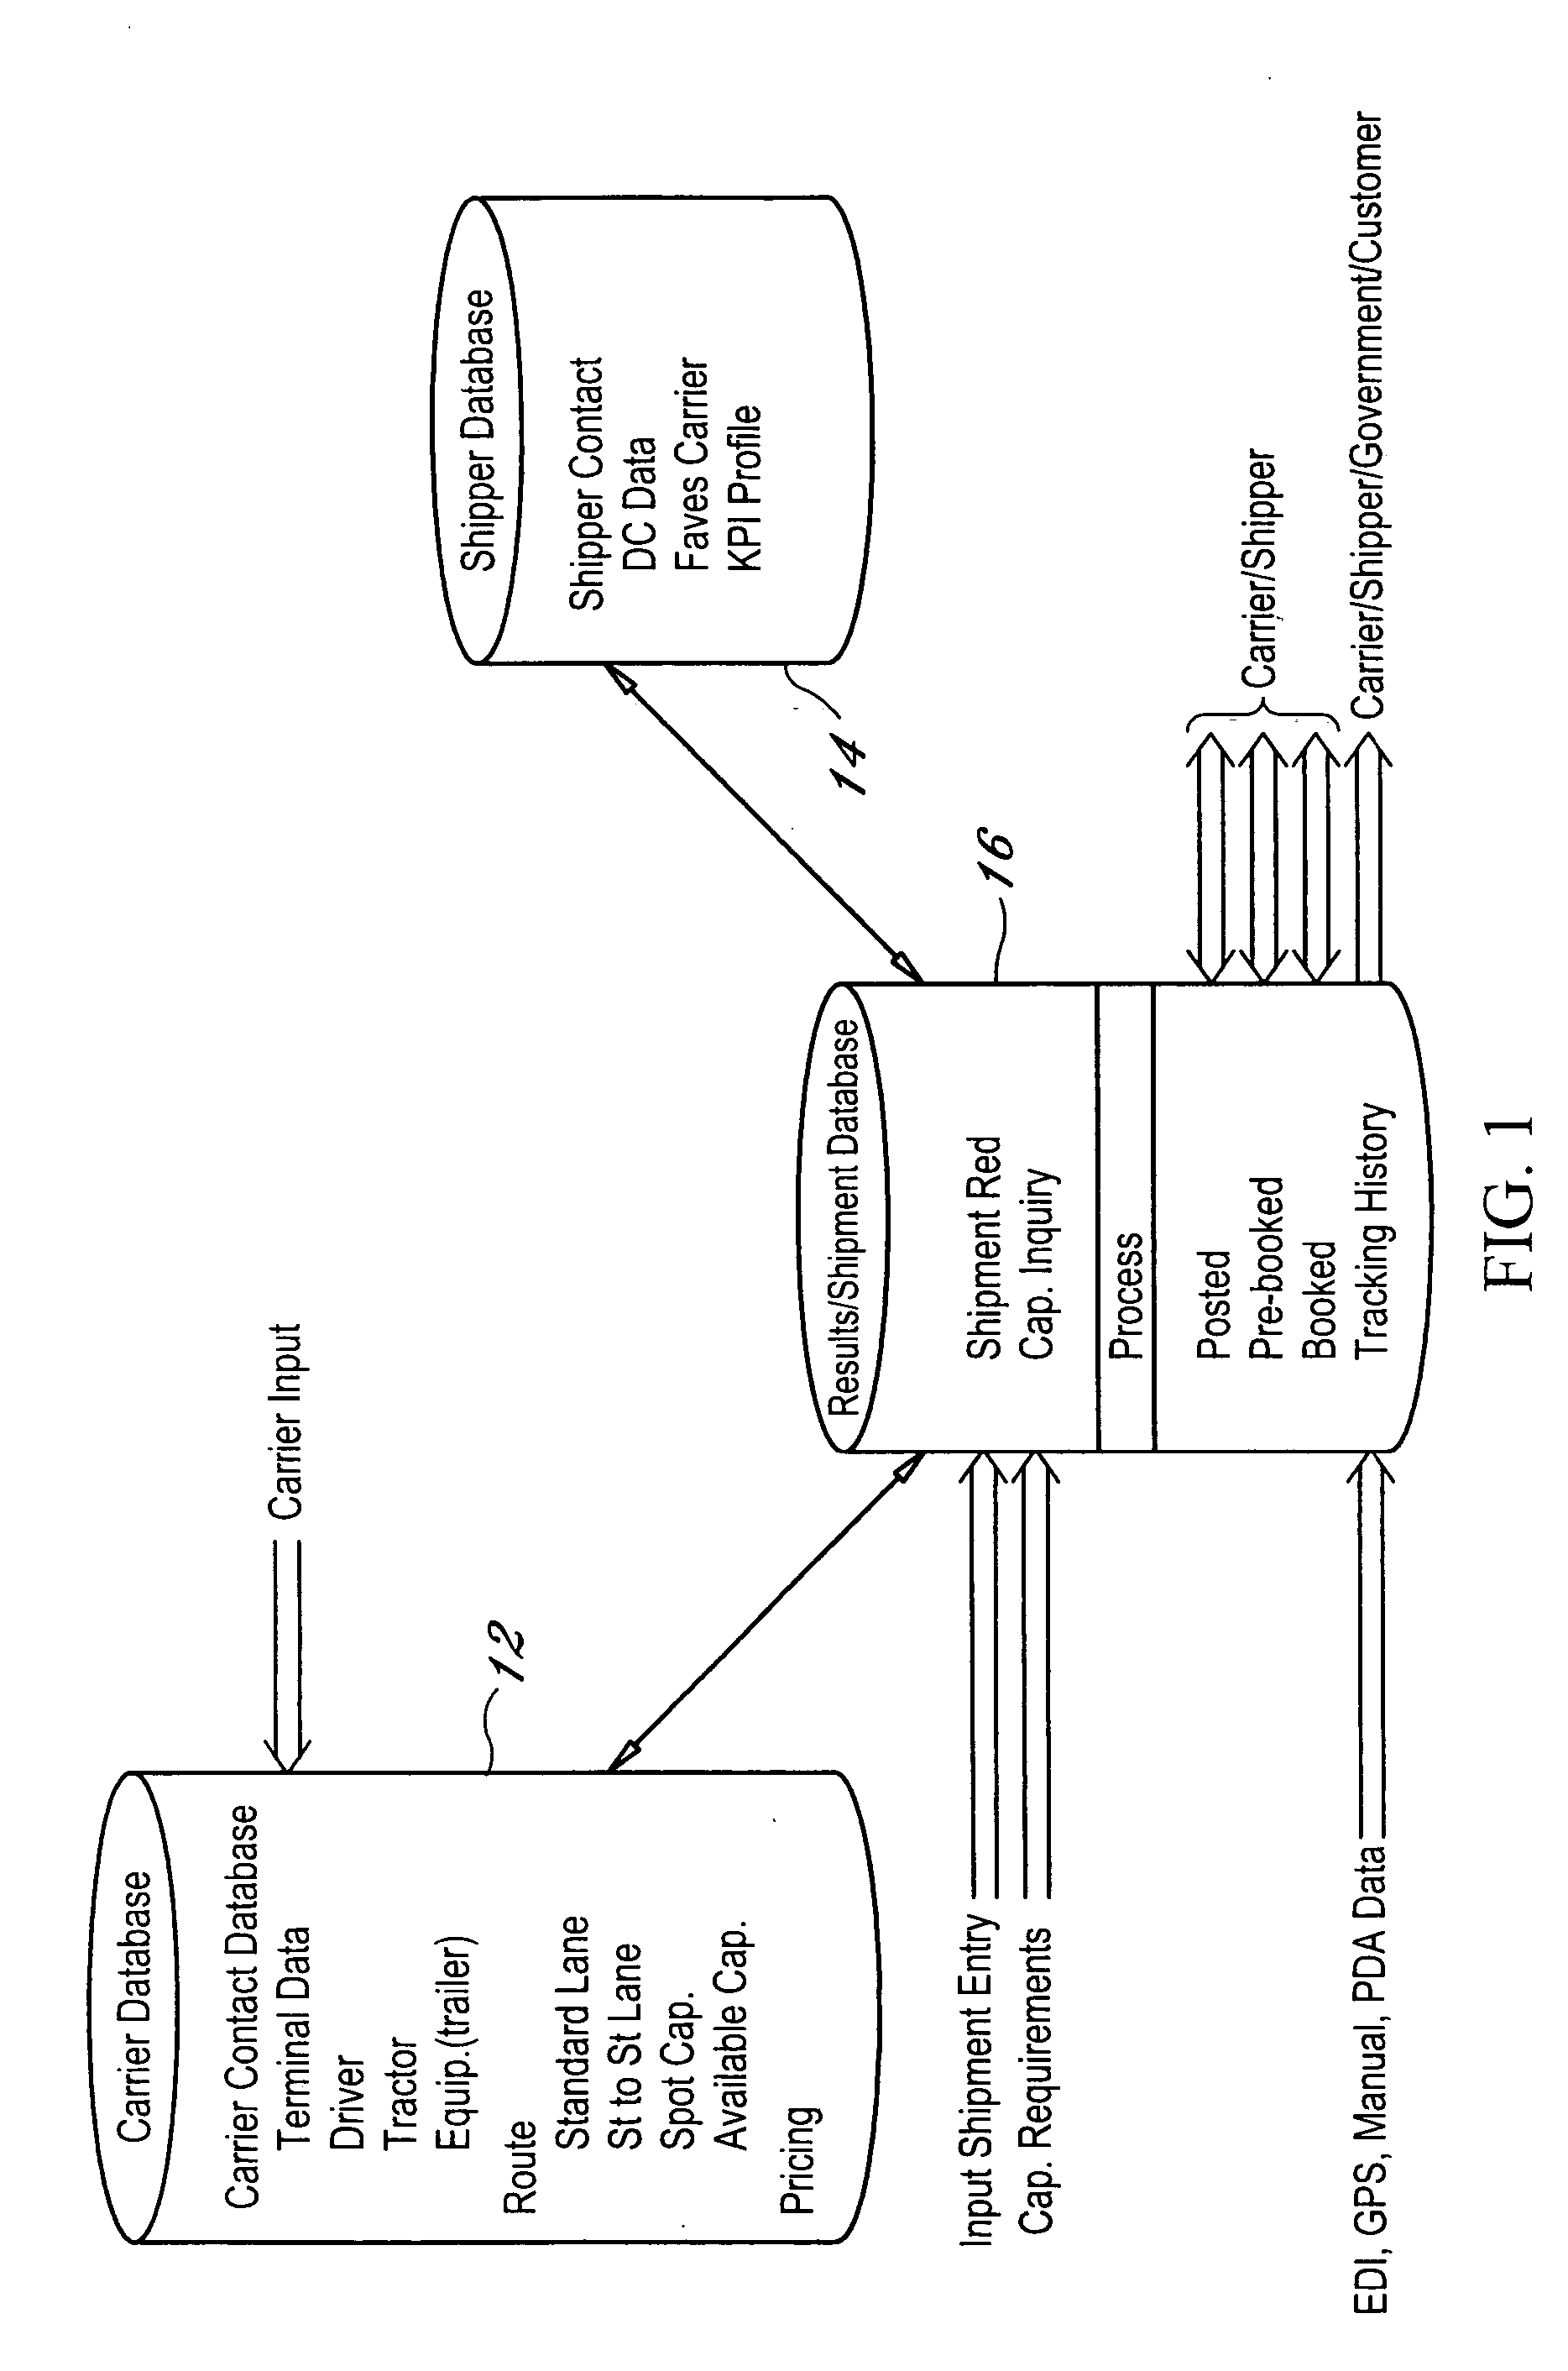 Dynamic and predictive information system and method for shipping assets and transport